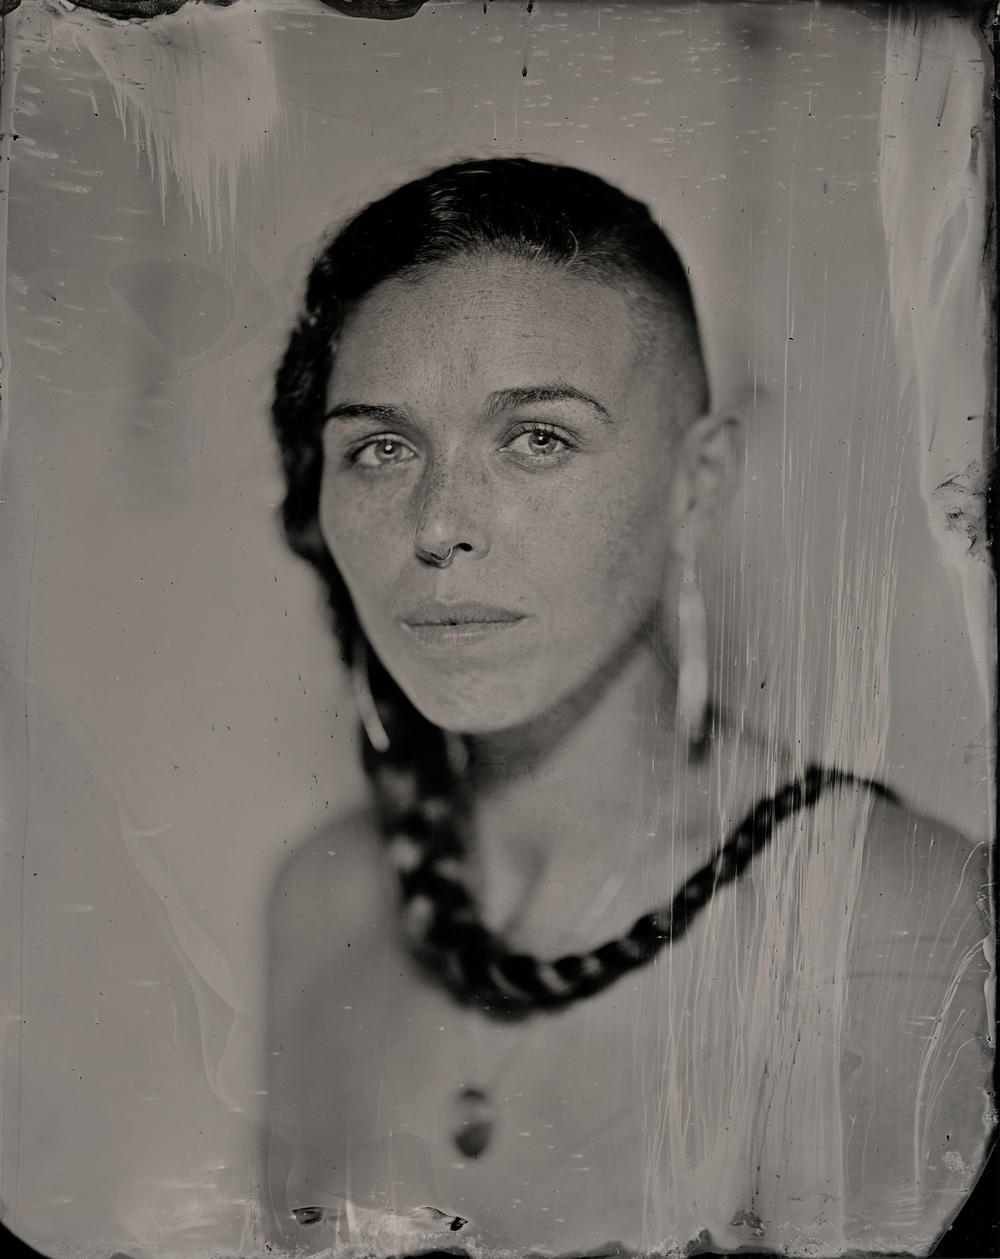 The work of Kali Spitzer (Kaska Dena & Jewish) embraces the stories of BIPOC, queer and trans people, creating representations that are self-determined. This traditional tintype photo of Larissa Lorraine Grieves (Nisga'a, Gitxsan, Cree, Blackfoot from the Pikuni Nation, Metis, Swedish, Irish and Scottish) was made in 2021.